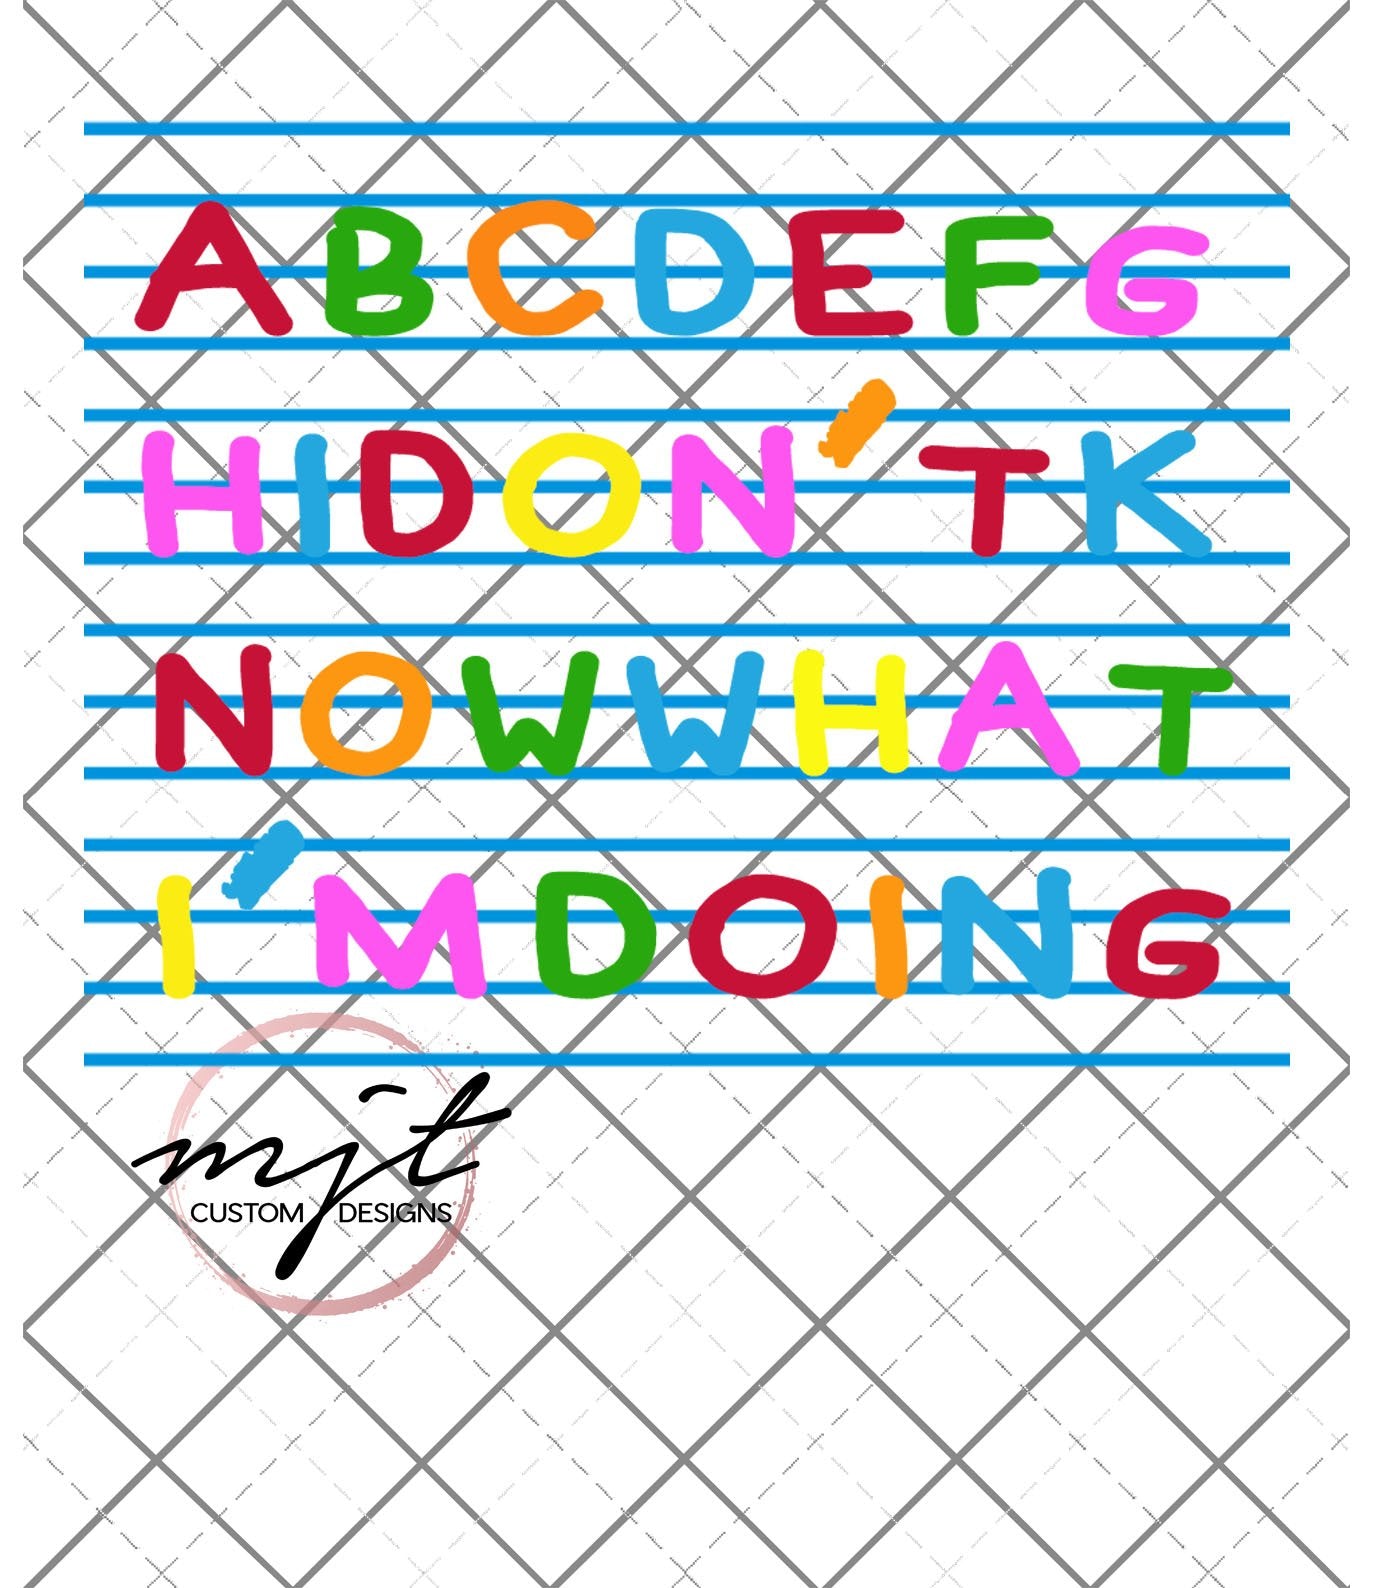 ABCD I Don't know what I'm doing homeschool - funny school  Laser Printed Waterslide